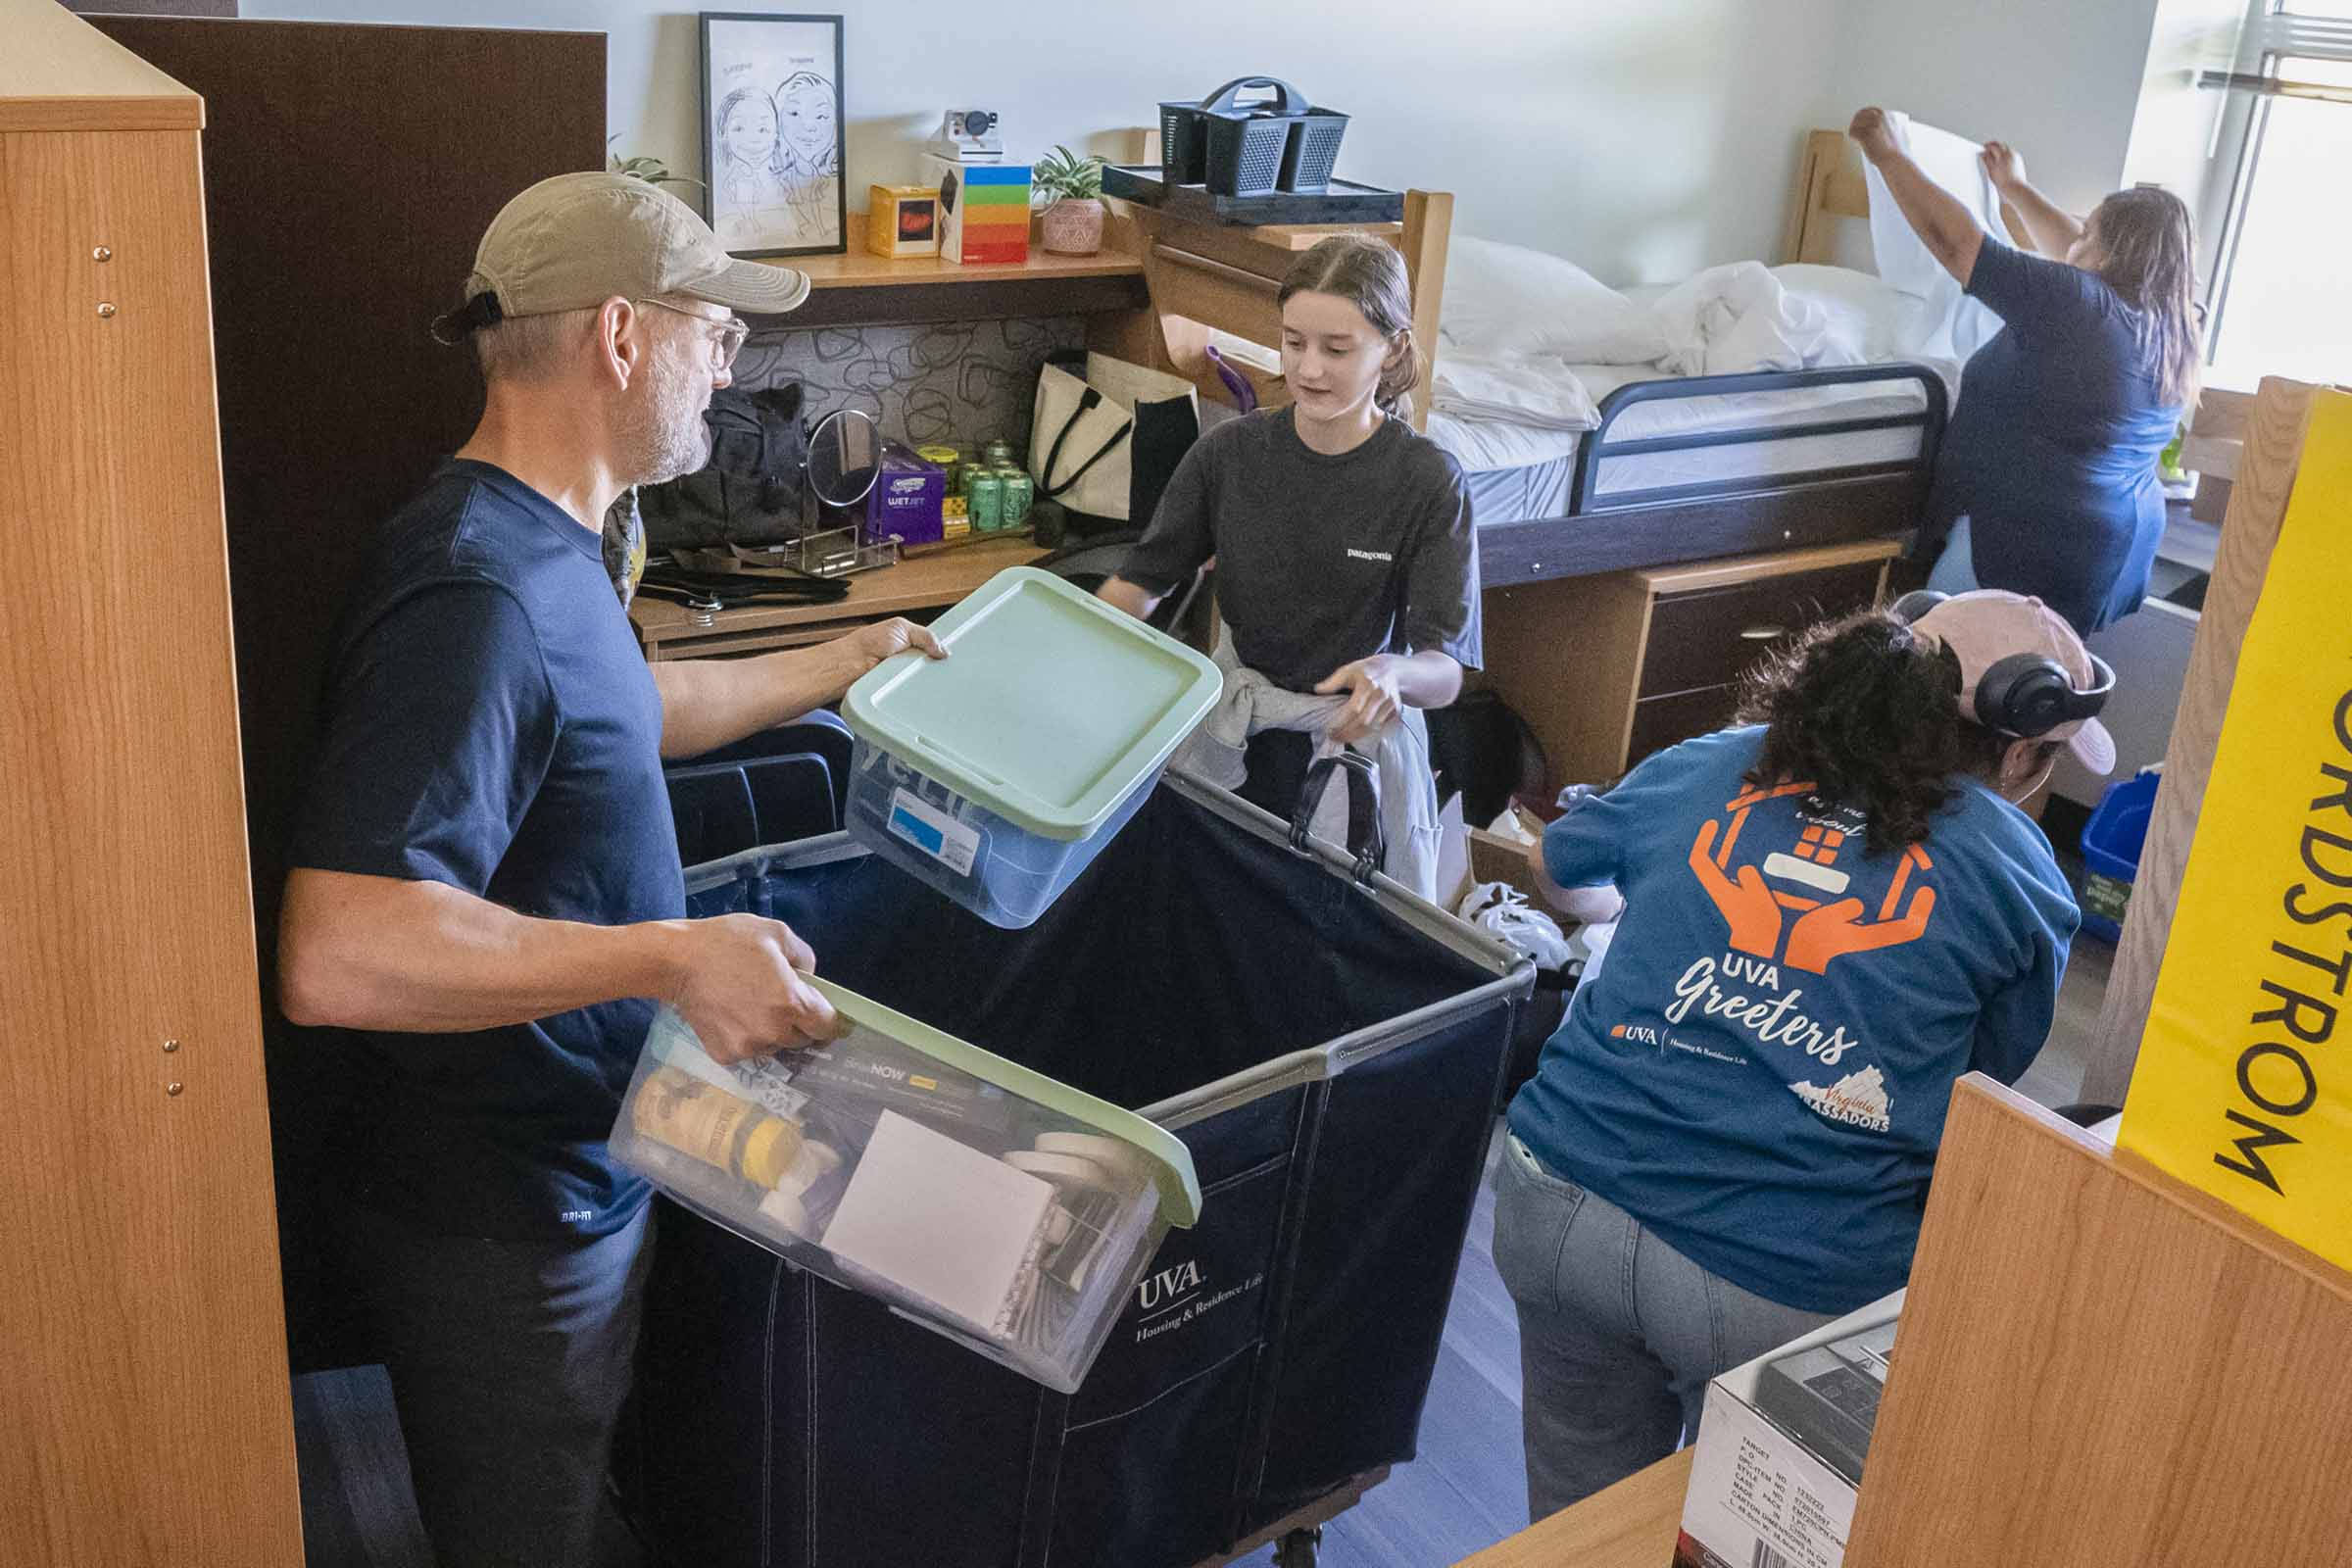 Group unpacking in new dorm room